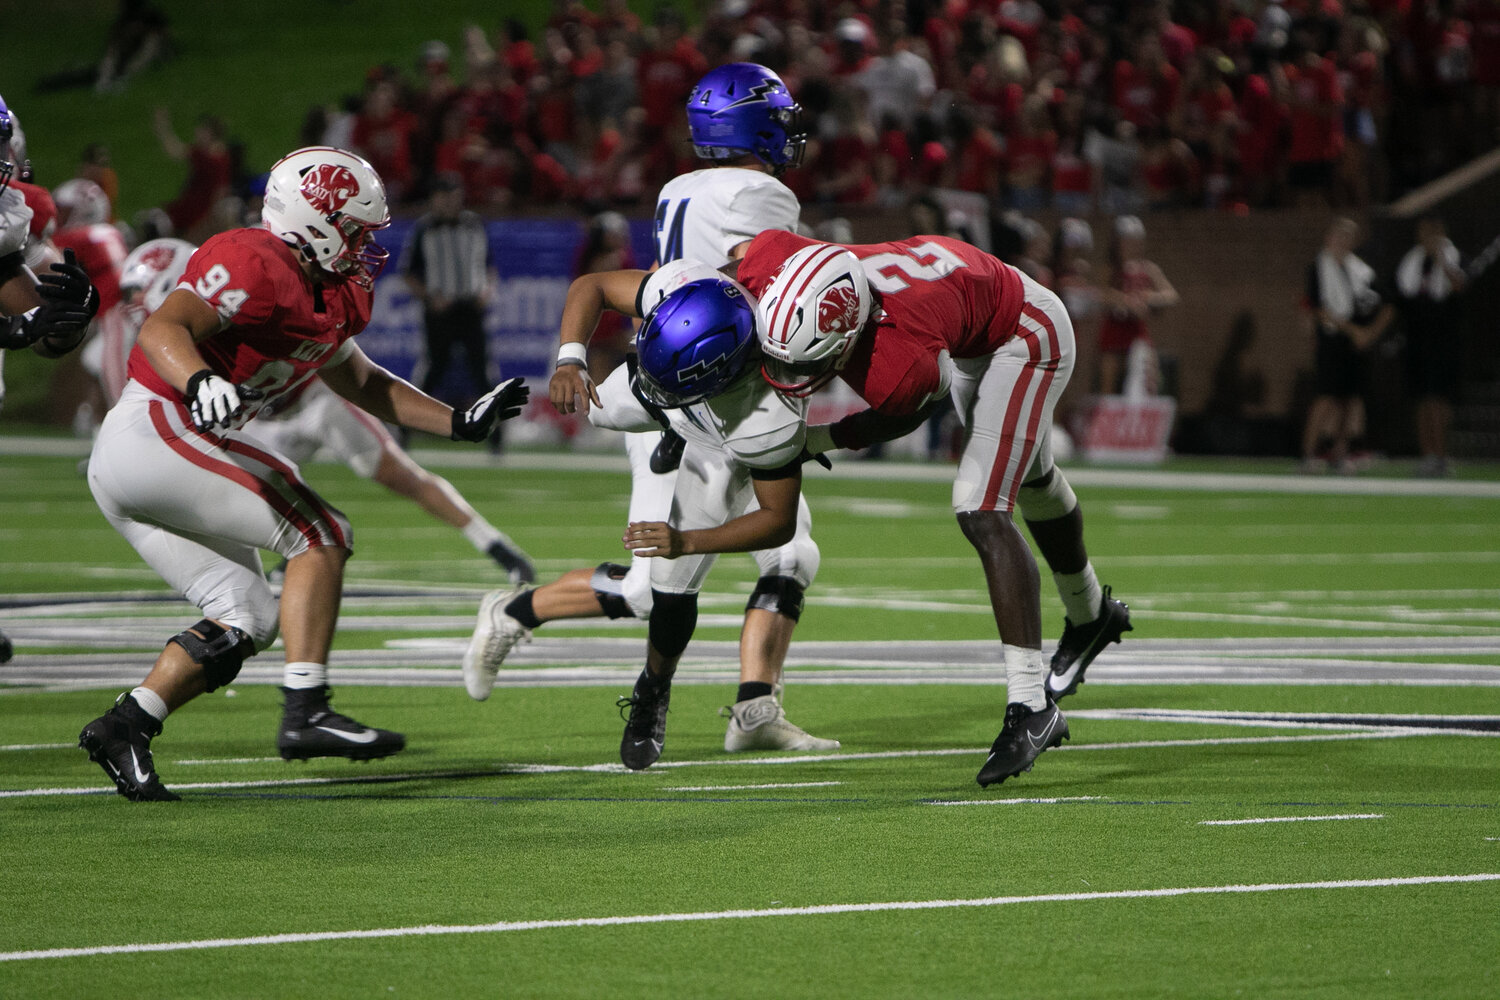 Dak Brinkley and Tyler Willis tackle a Clear Springs player during Saturday's game between Katy and Clear Springs at Rhodes Stadium.